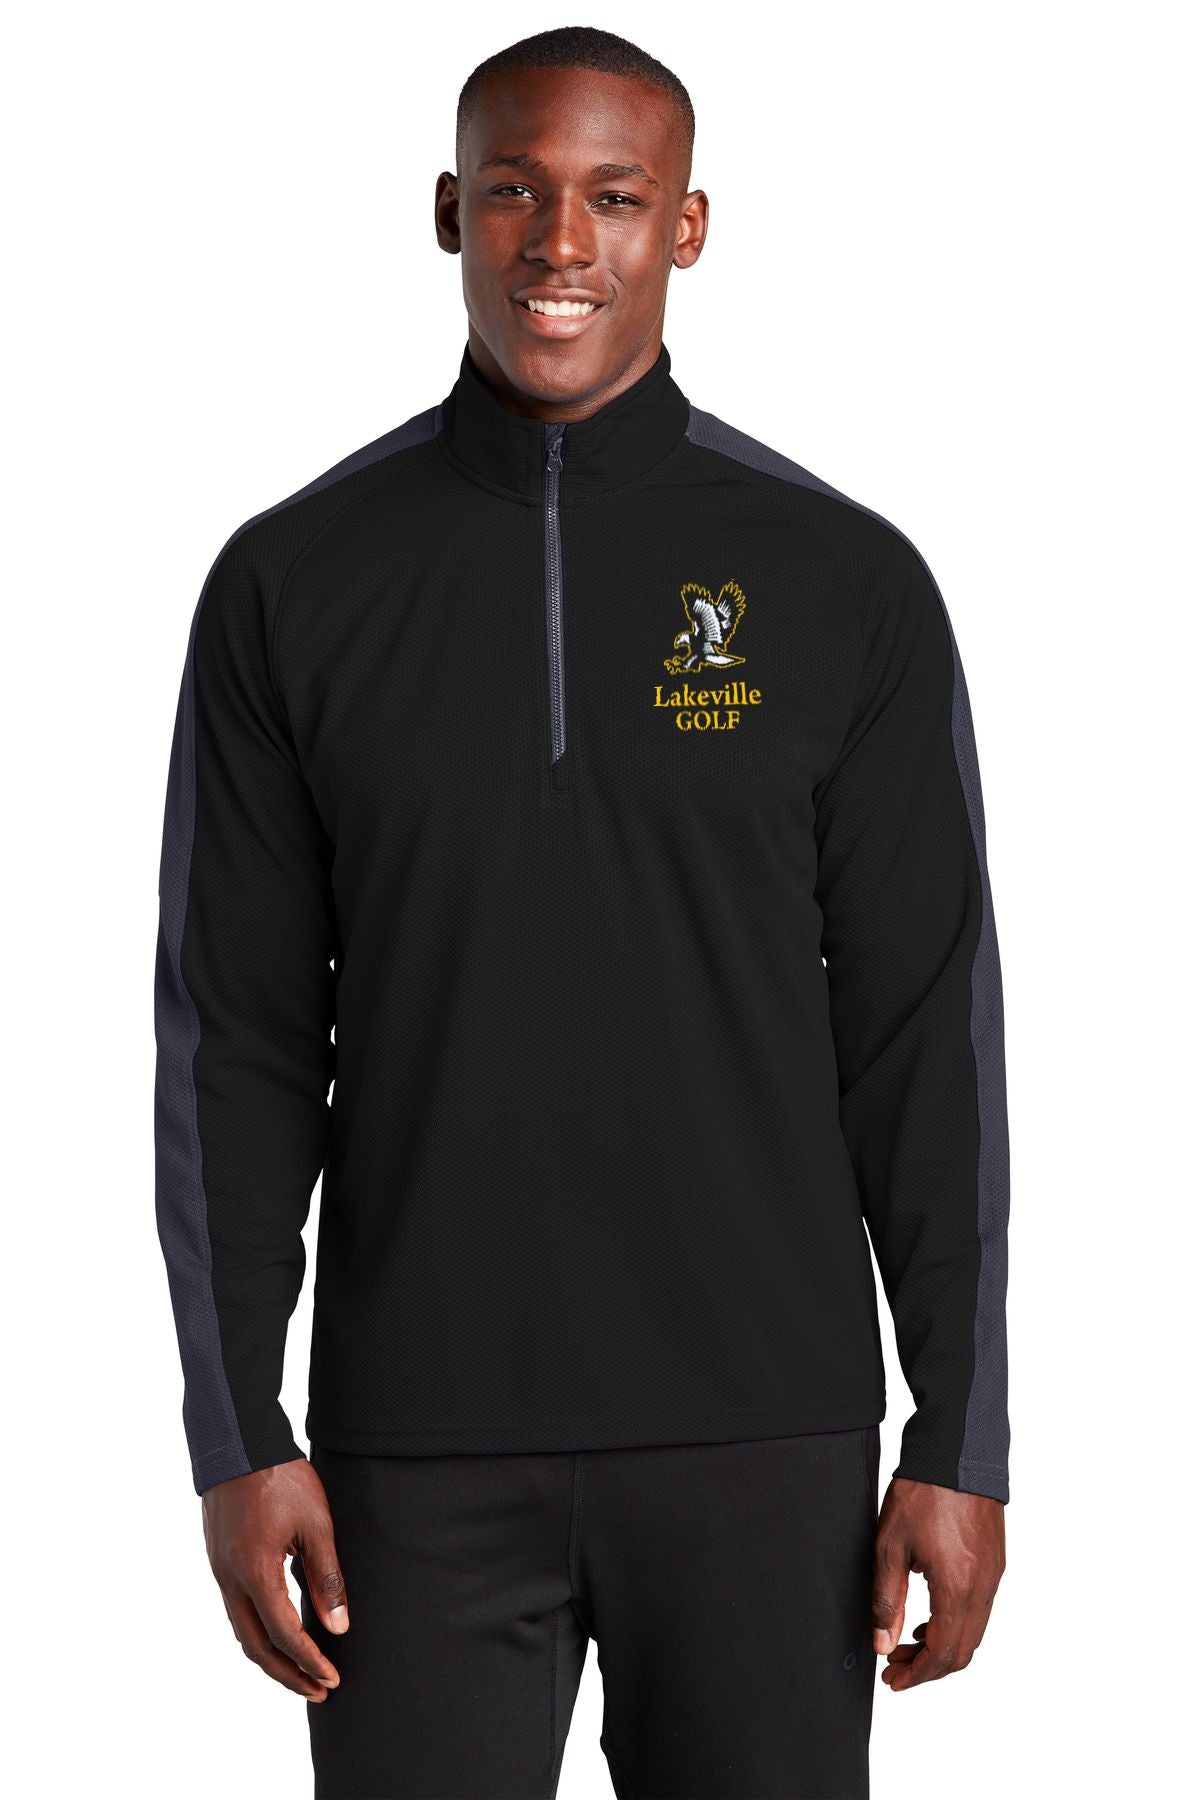 Lakeville Golf Sport-Wick Textured Colorblock 1/4-Zip Pullover